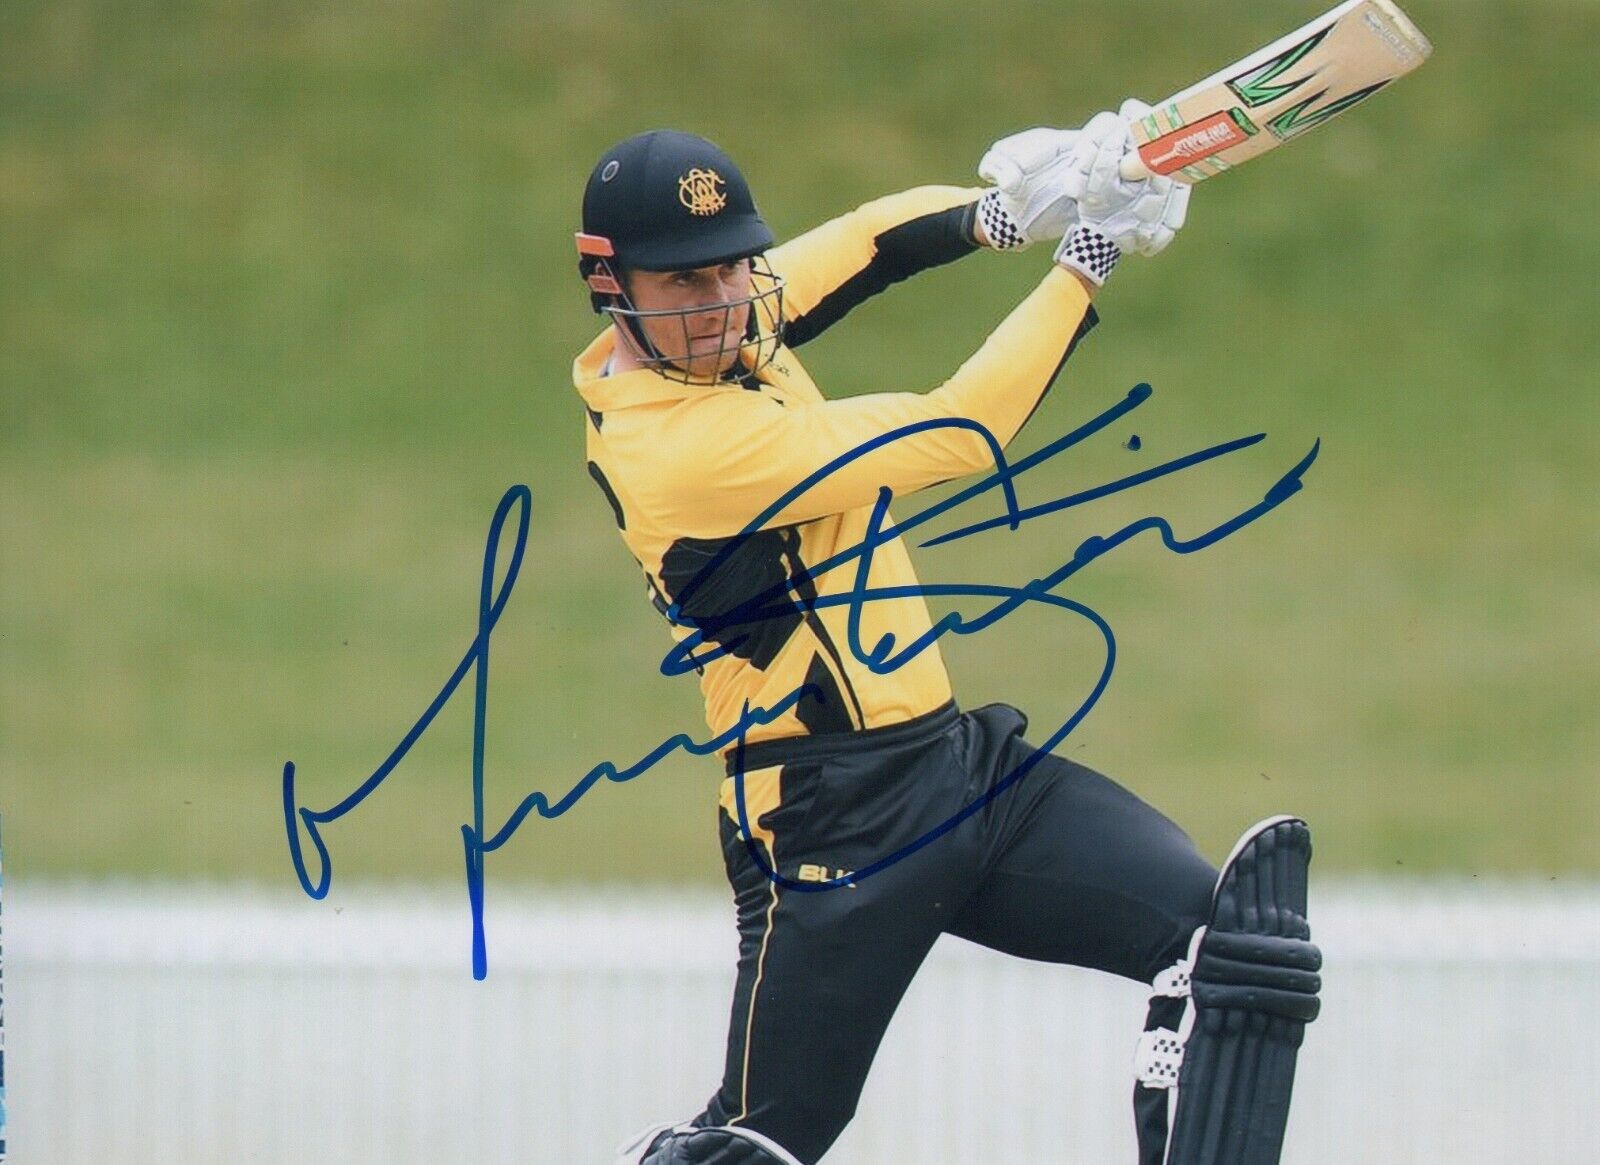 5x7 Original Autographed Photo of Australian Cricketer Marcus Stoinis